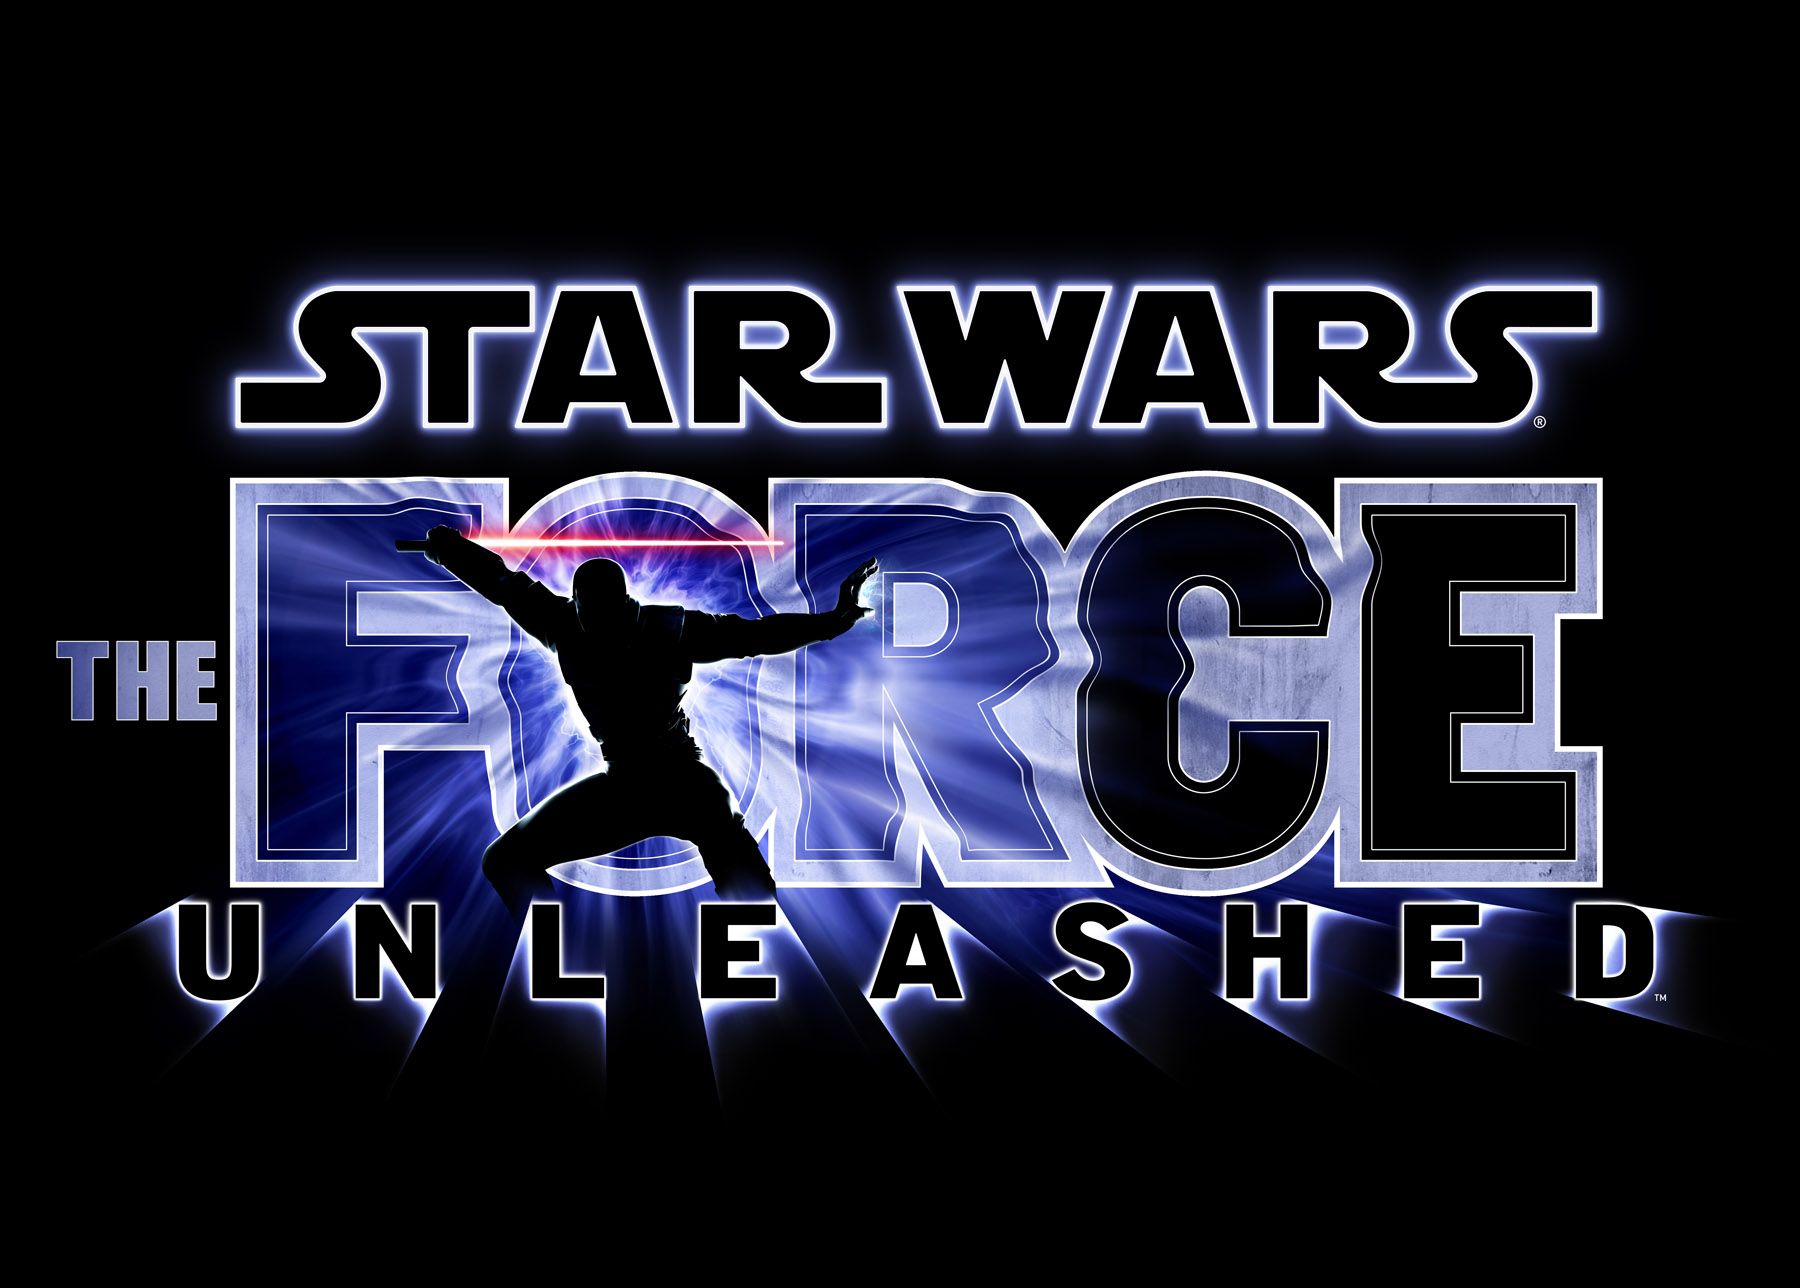 Star Wars: The Force Unleashed. The Force Unleashed